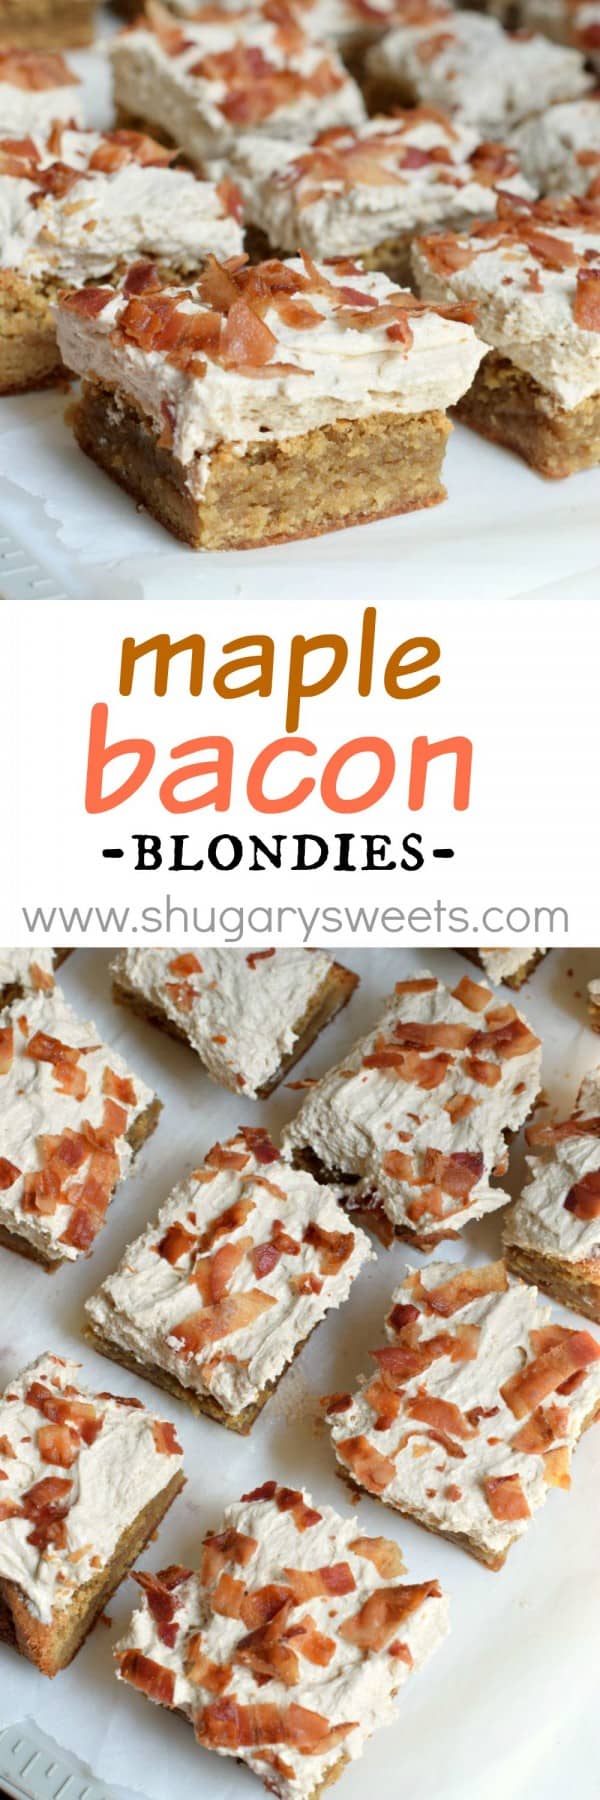 These Maple Bacon Blondies are the perfect sweet and salty dessert. From the chewy blondie base to the fluffy maple frosting and crispy bacon, each bite is delicious!